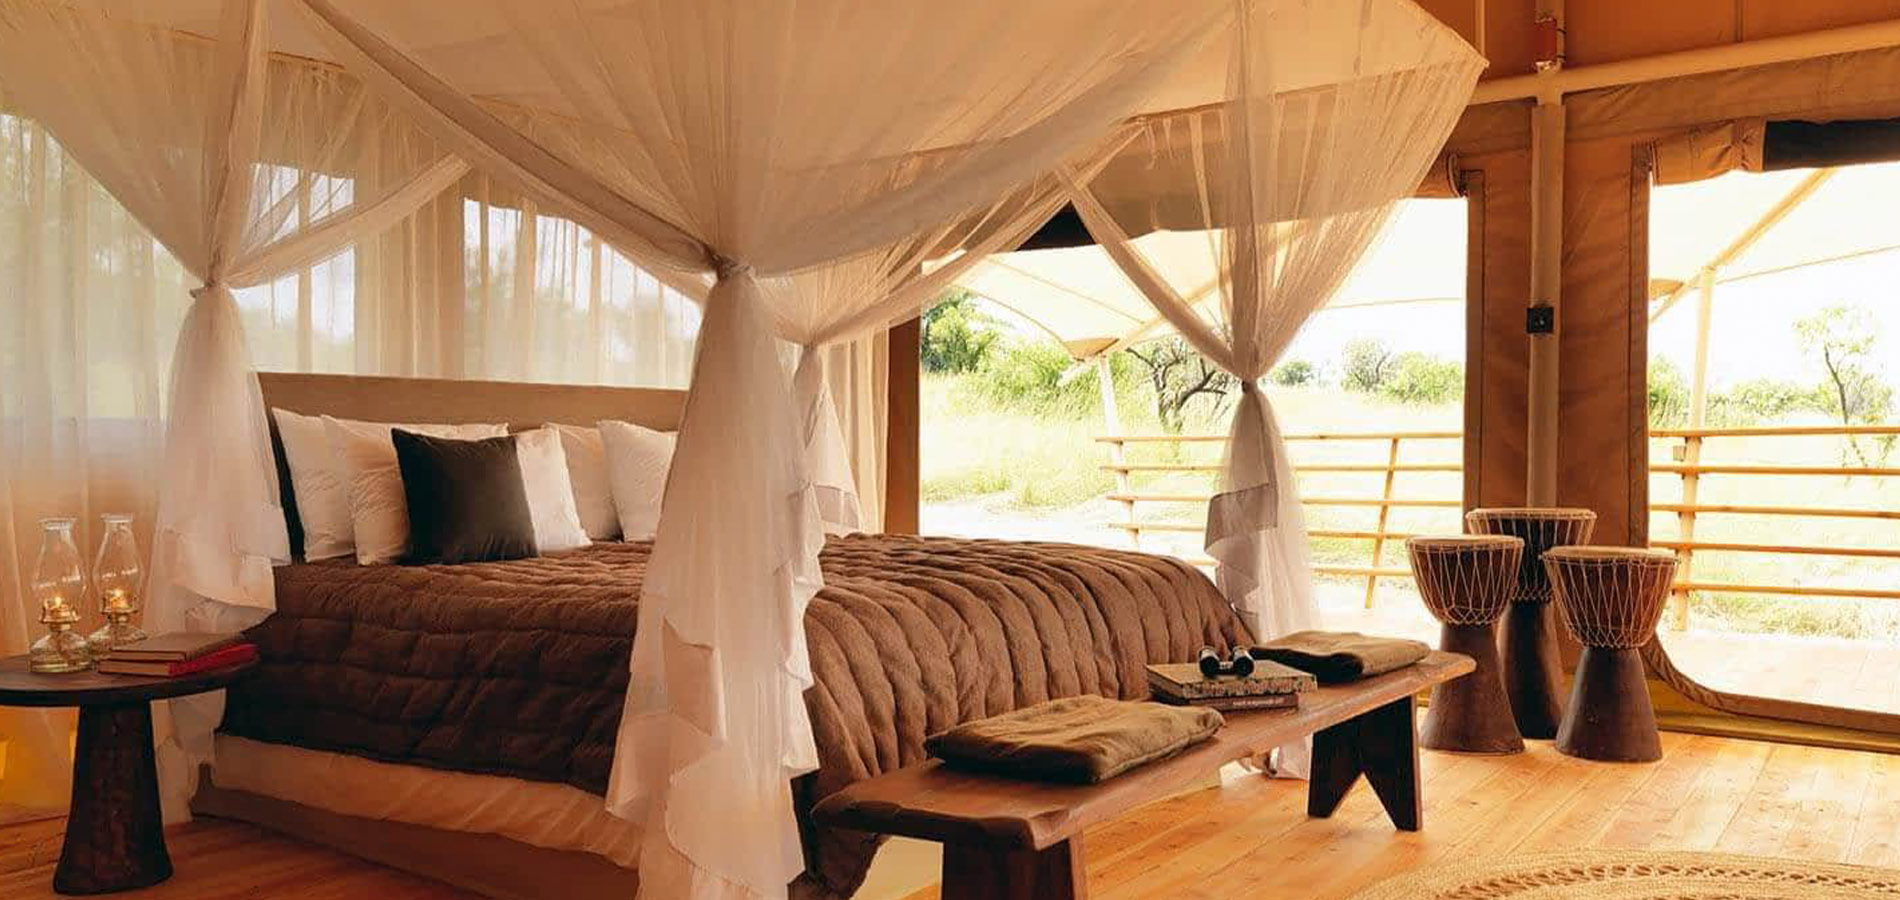 Enjoy the Best Luxury African Accommodation in Serengeti at Best Bushtops Luxury Tented Camp Serengeti Tanzania Also is the Best accommodation african safari Accommodation, Best luxury Bushtops luxury Camp Tanzania, tanzania luxury safari, in Serengeti safari tour the most luxurious safari lodge in tanzania are Nestled between the rocky outcrops of Kogakuria Kopje, the Bushtops luxury Serengeti lies on the doorstep of the Great Wildebeest Migration’s route through the Northern Serengeti.